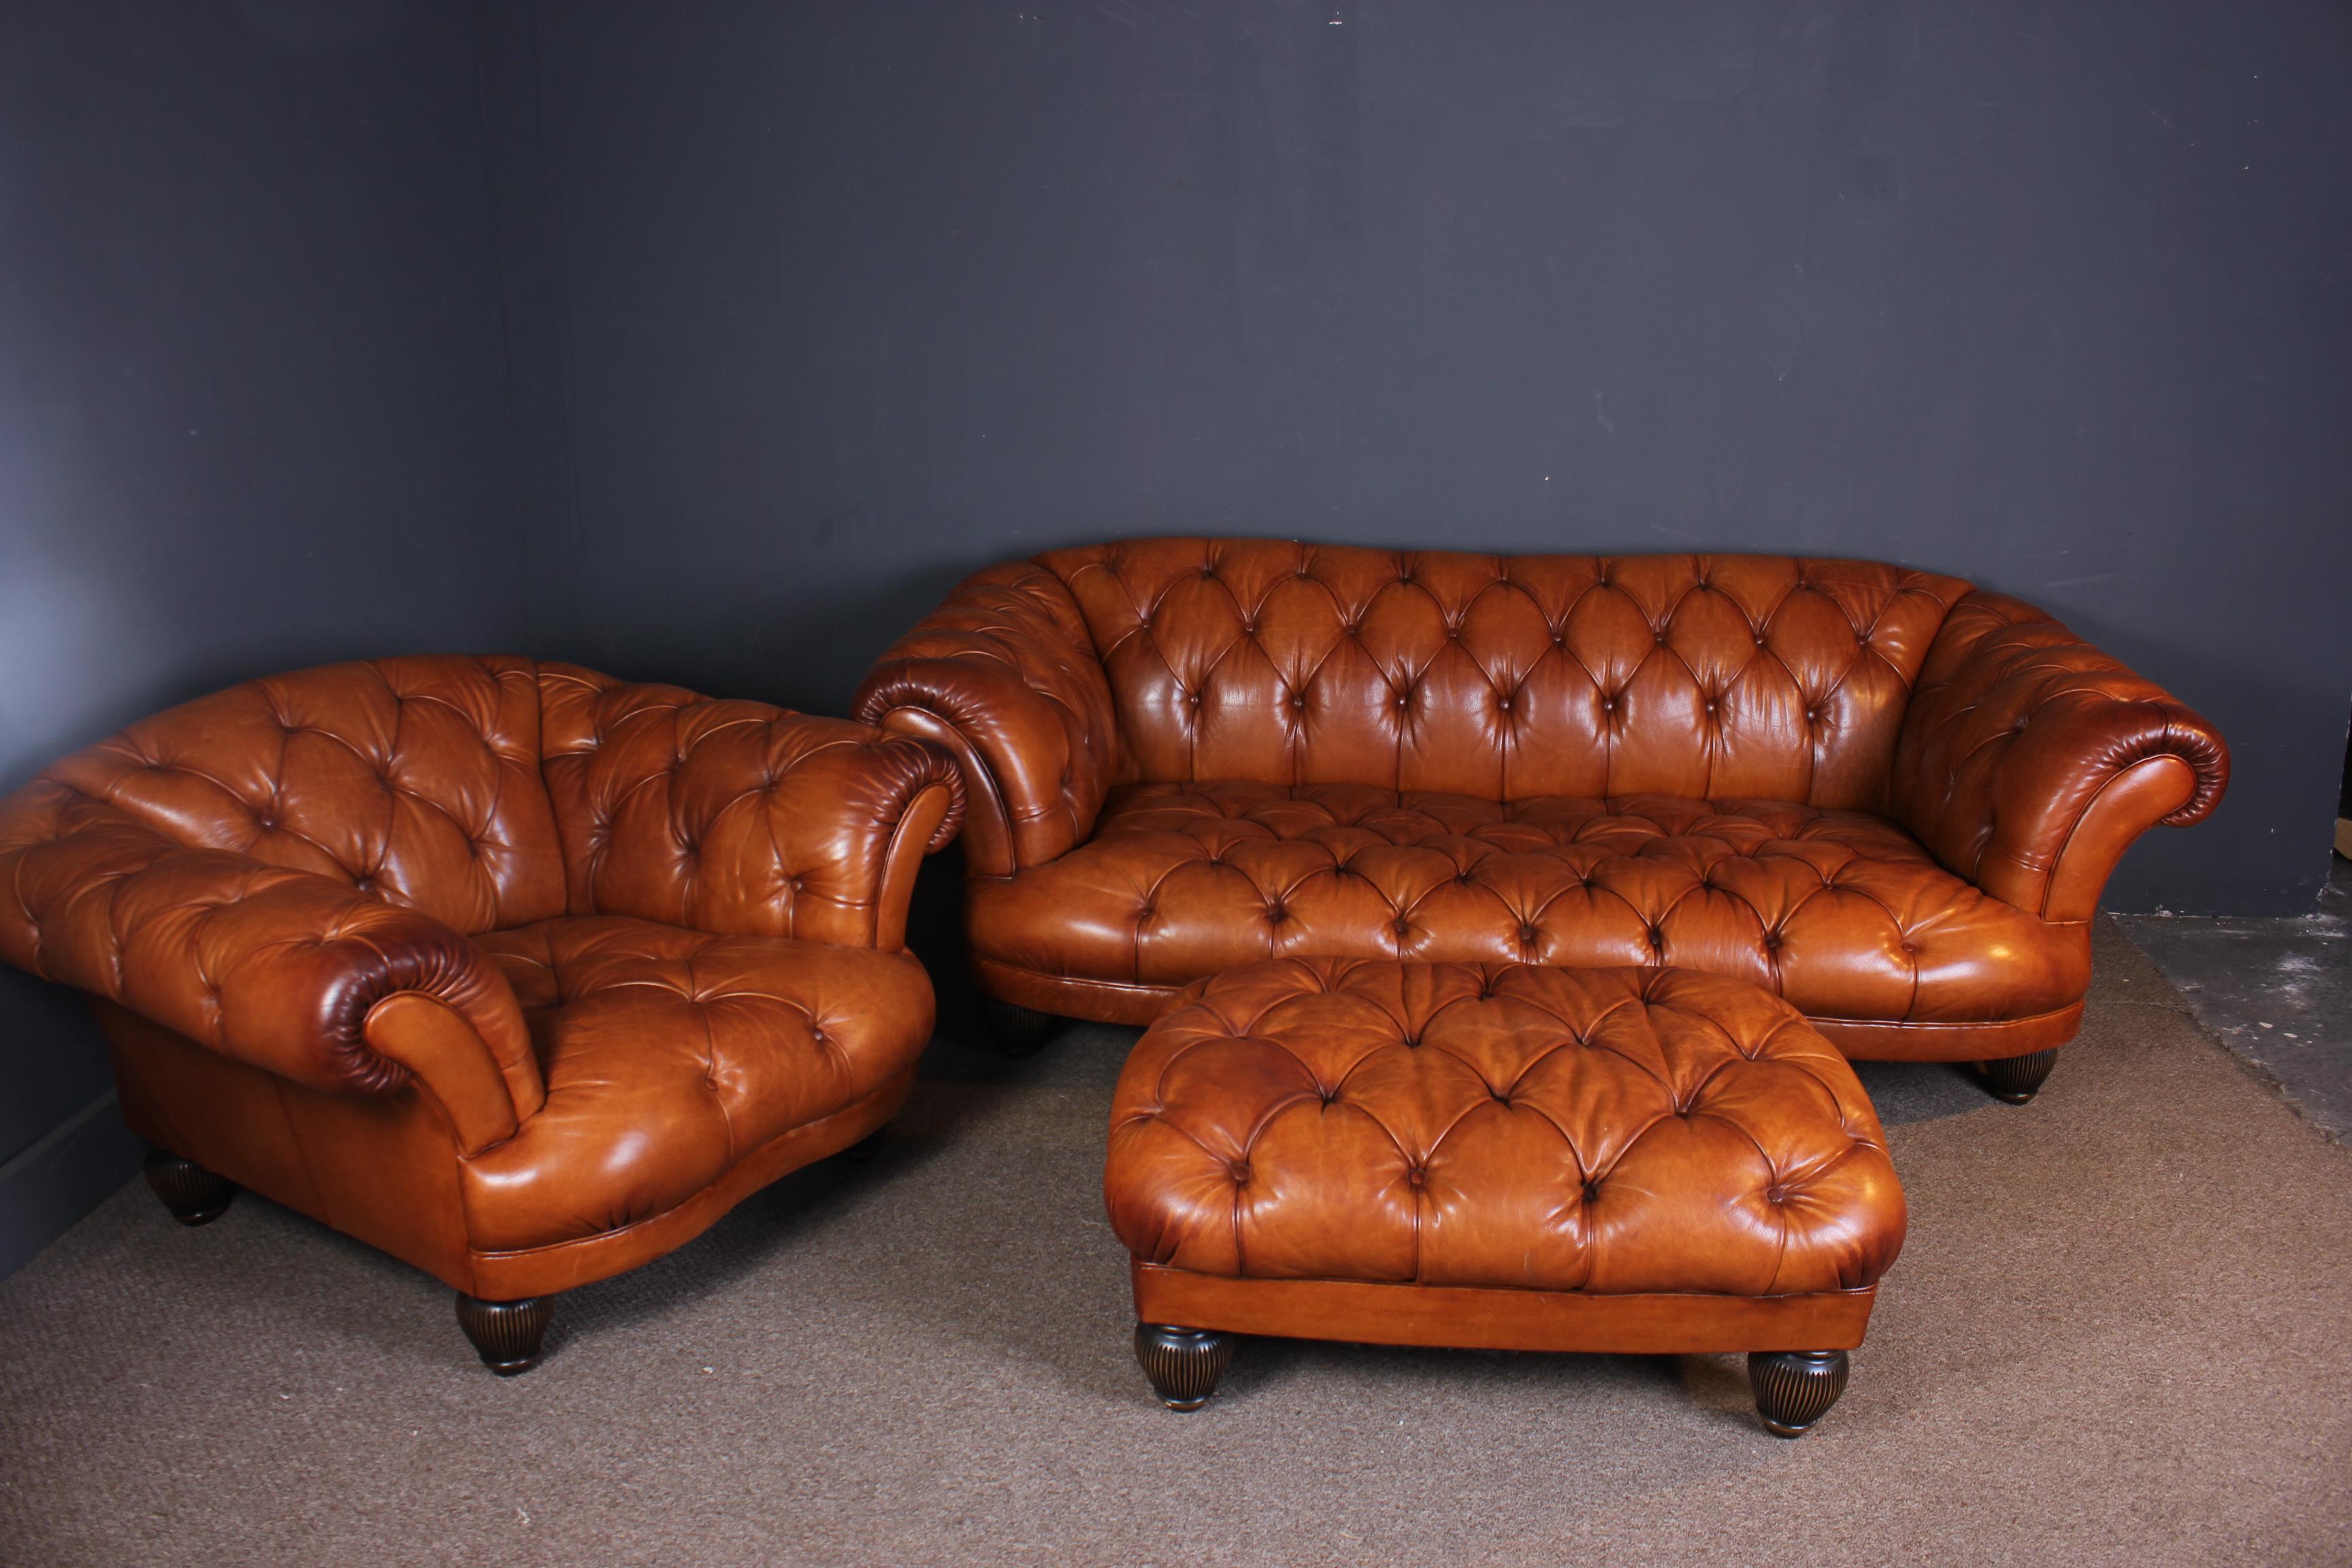 A beautiful superb quality thick leather Chesterfield sofa, armchair and large matching footstool in a stunning caramel brown color. All three items are in very good condition with no rips or tears but do have some age related marks due to use.